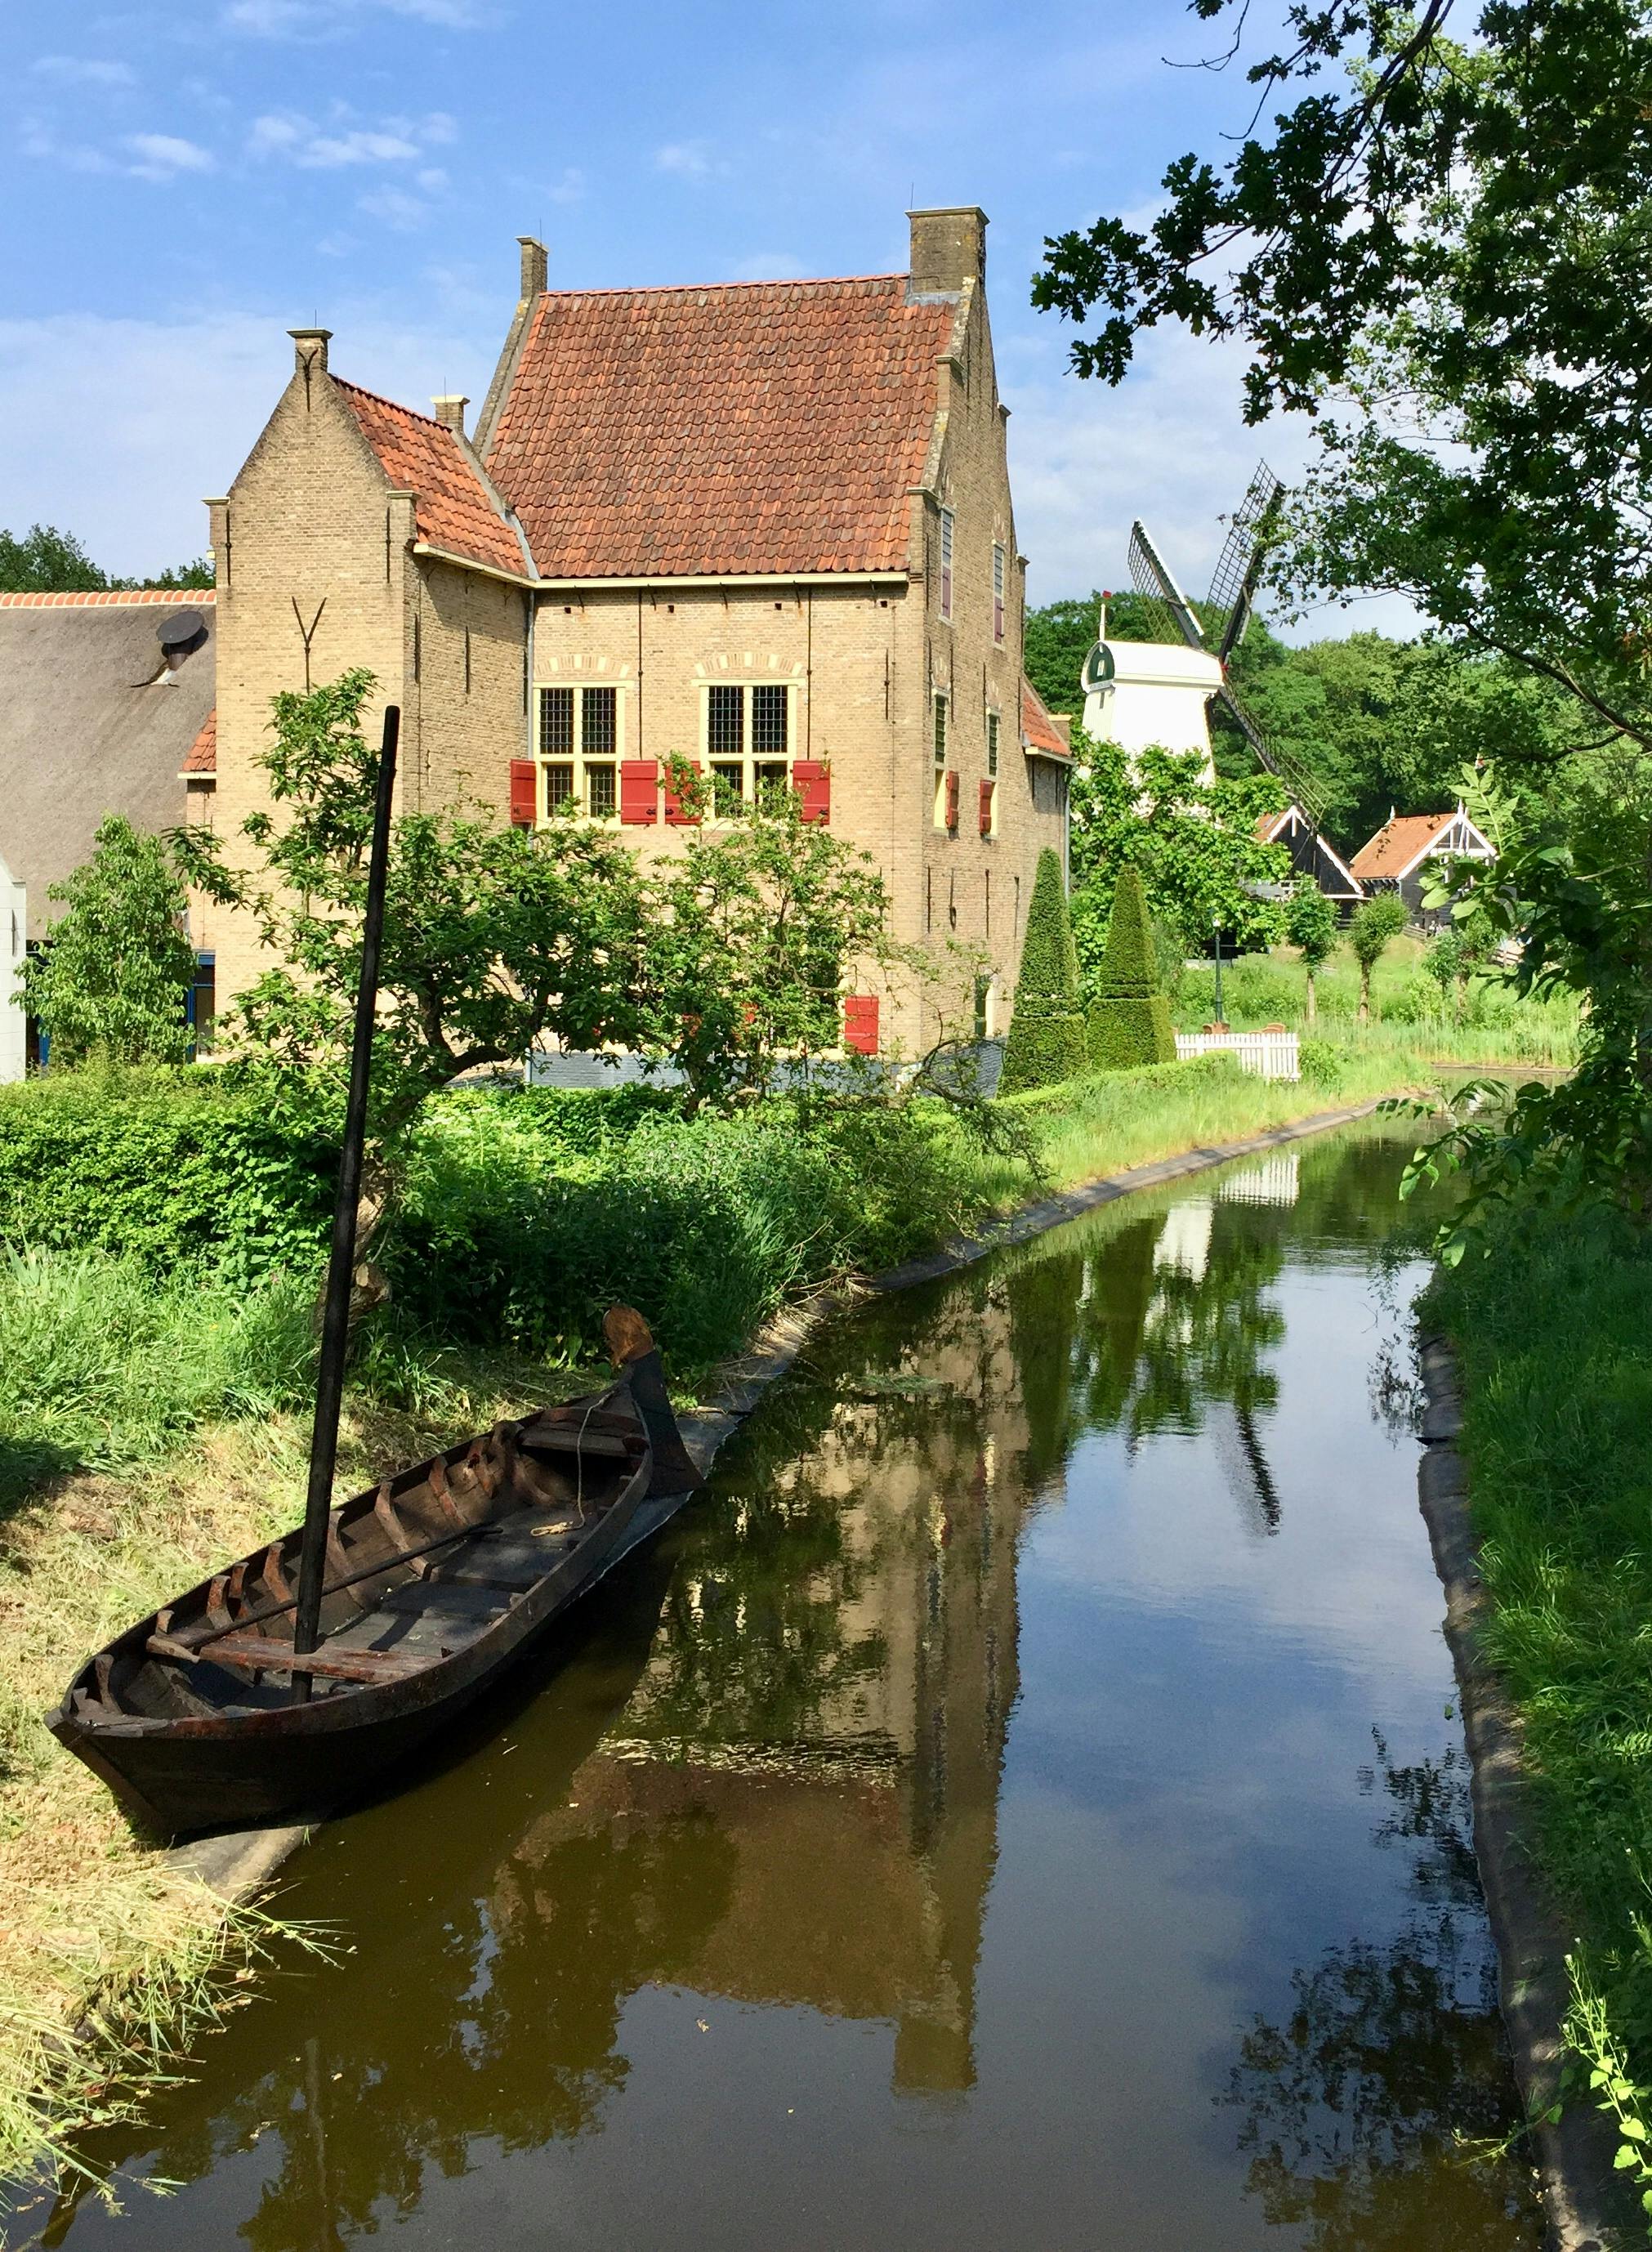 Free stock photo of Typical Netherlands rural scene with canal